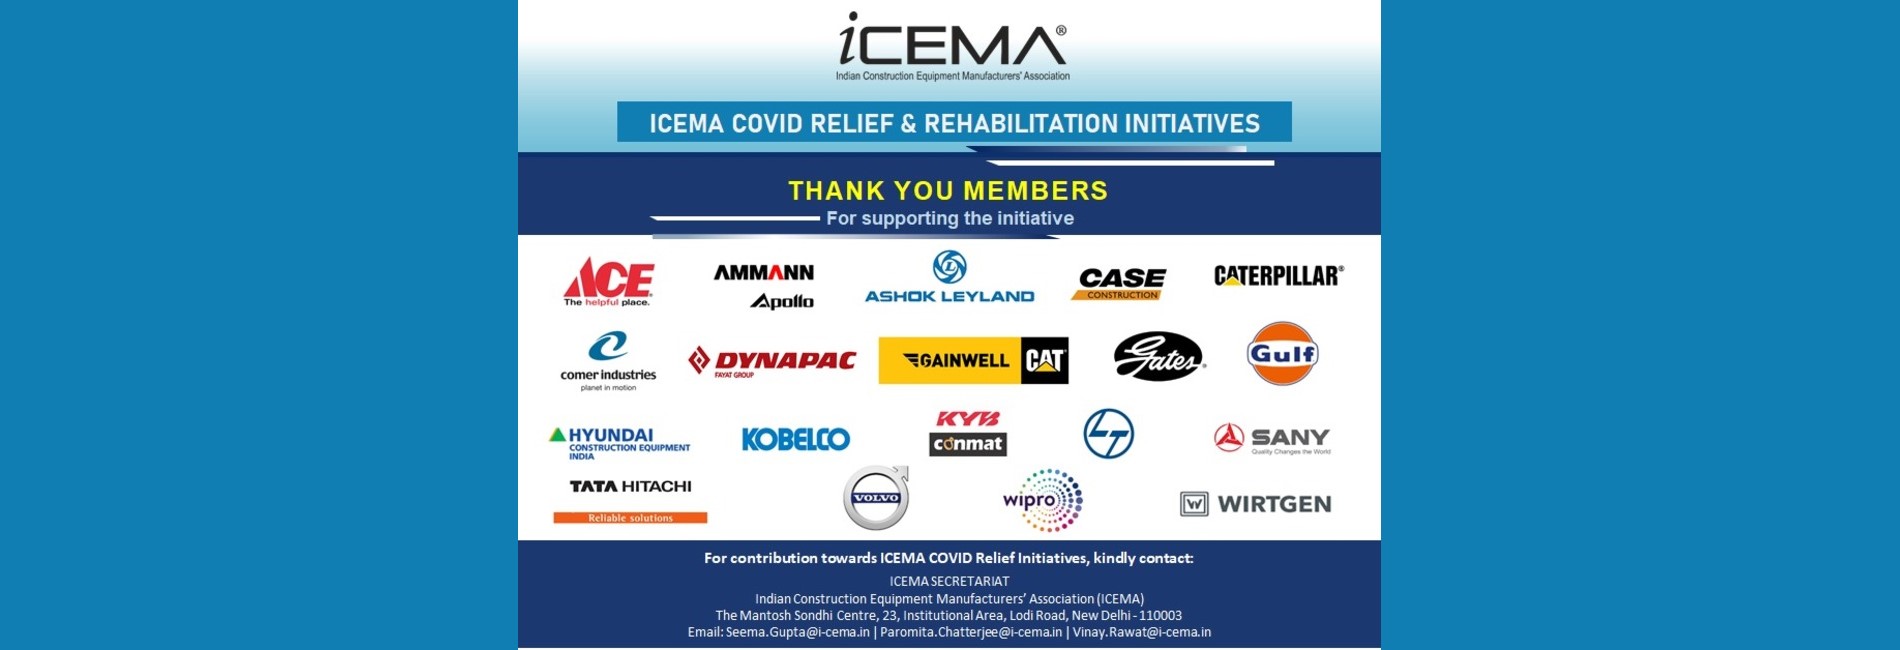 Covid Relief - Thank you members